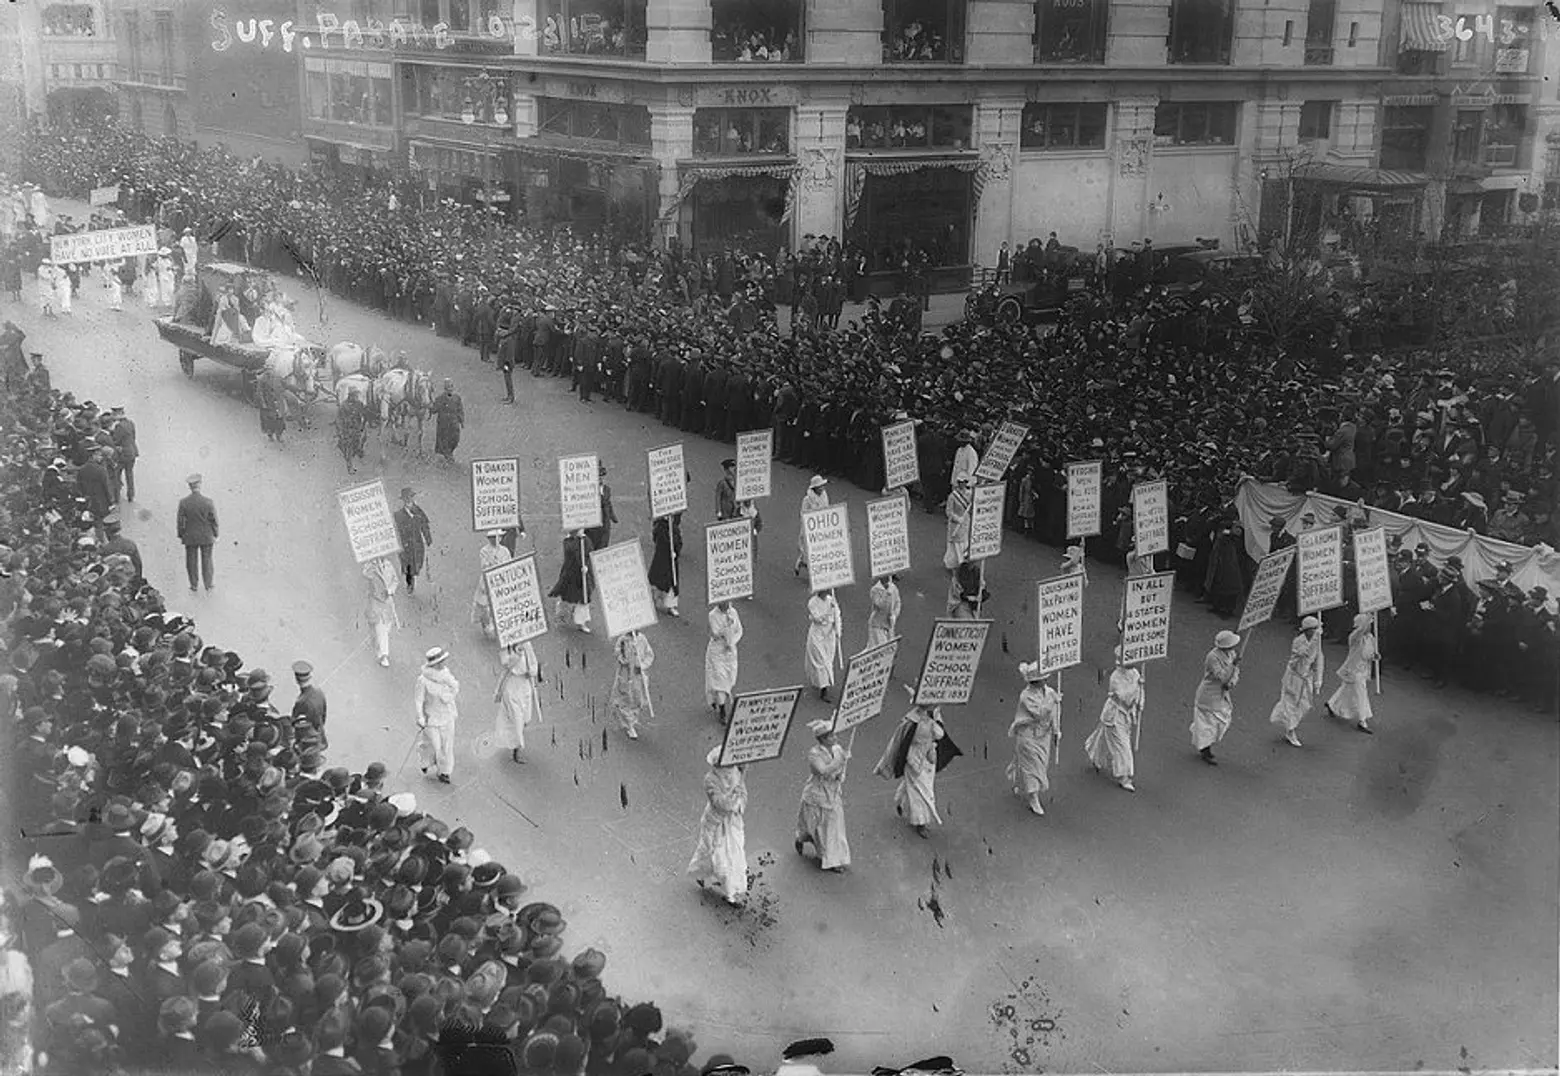 102 years ago, New York women voted for the first time